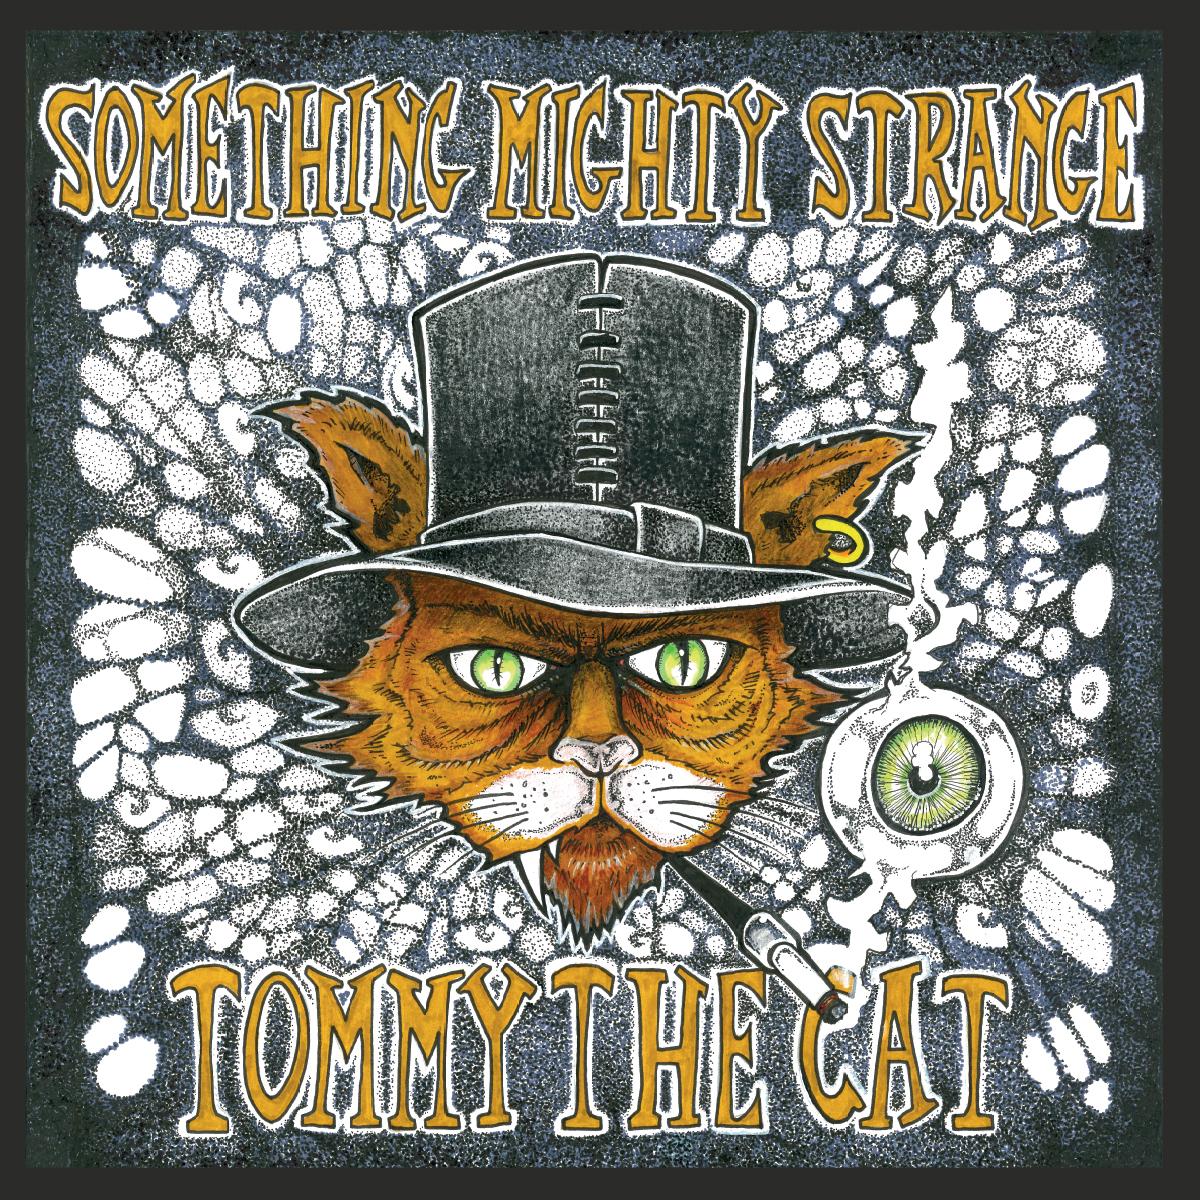 TOMMY THE CAT 'SOMETHING MIGHTY STRANGE EP' 12" [IMPORT]